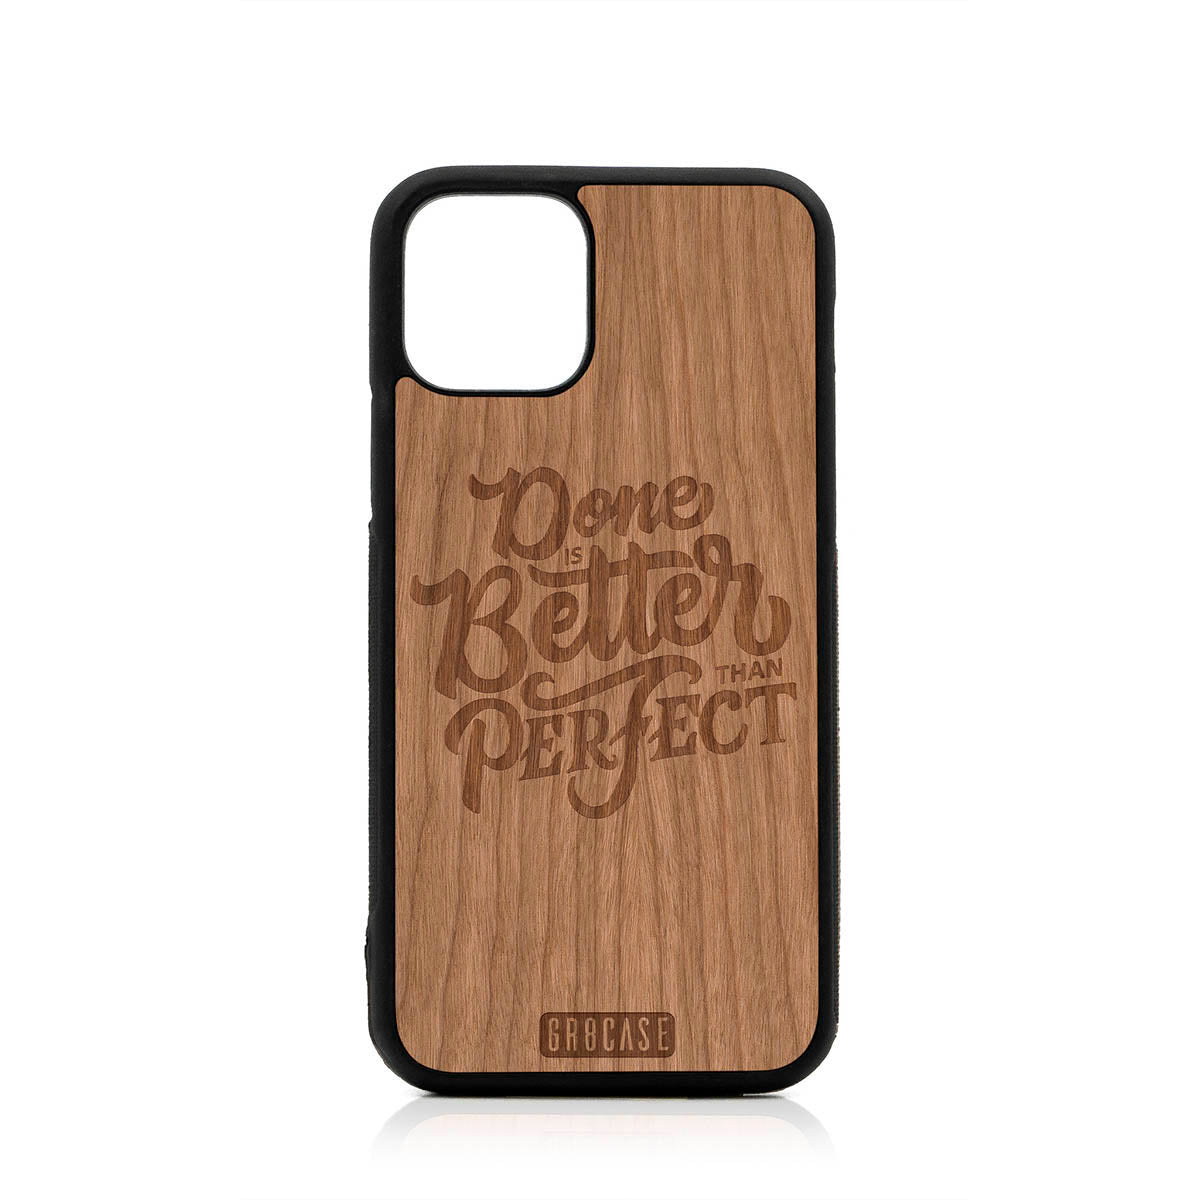 Done Is Better Than Perfect Design Wood Case For iPhone 11 Pro by GR8CASE